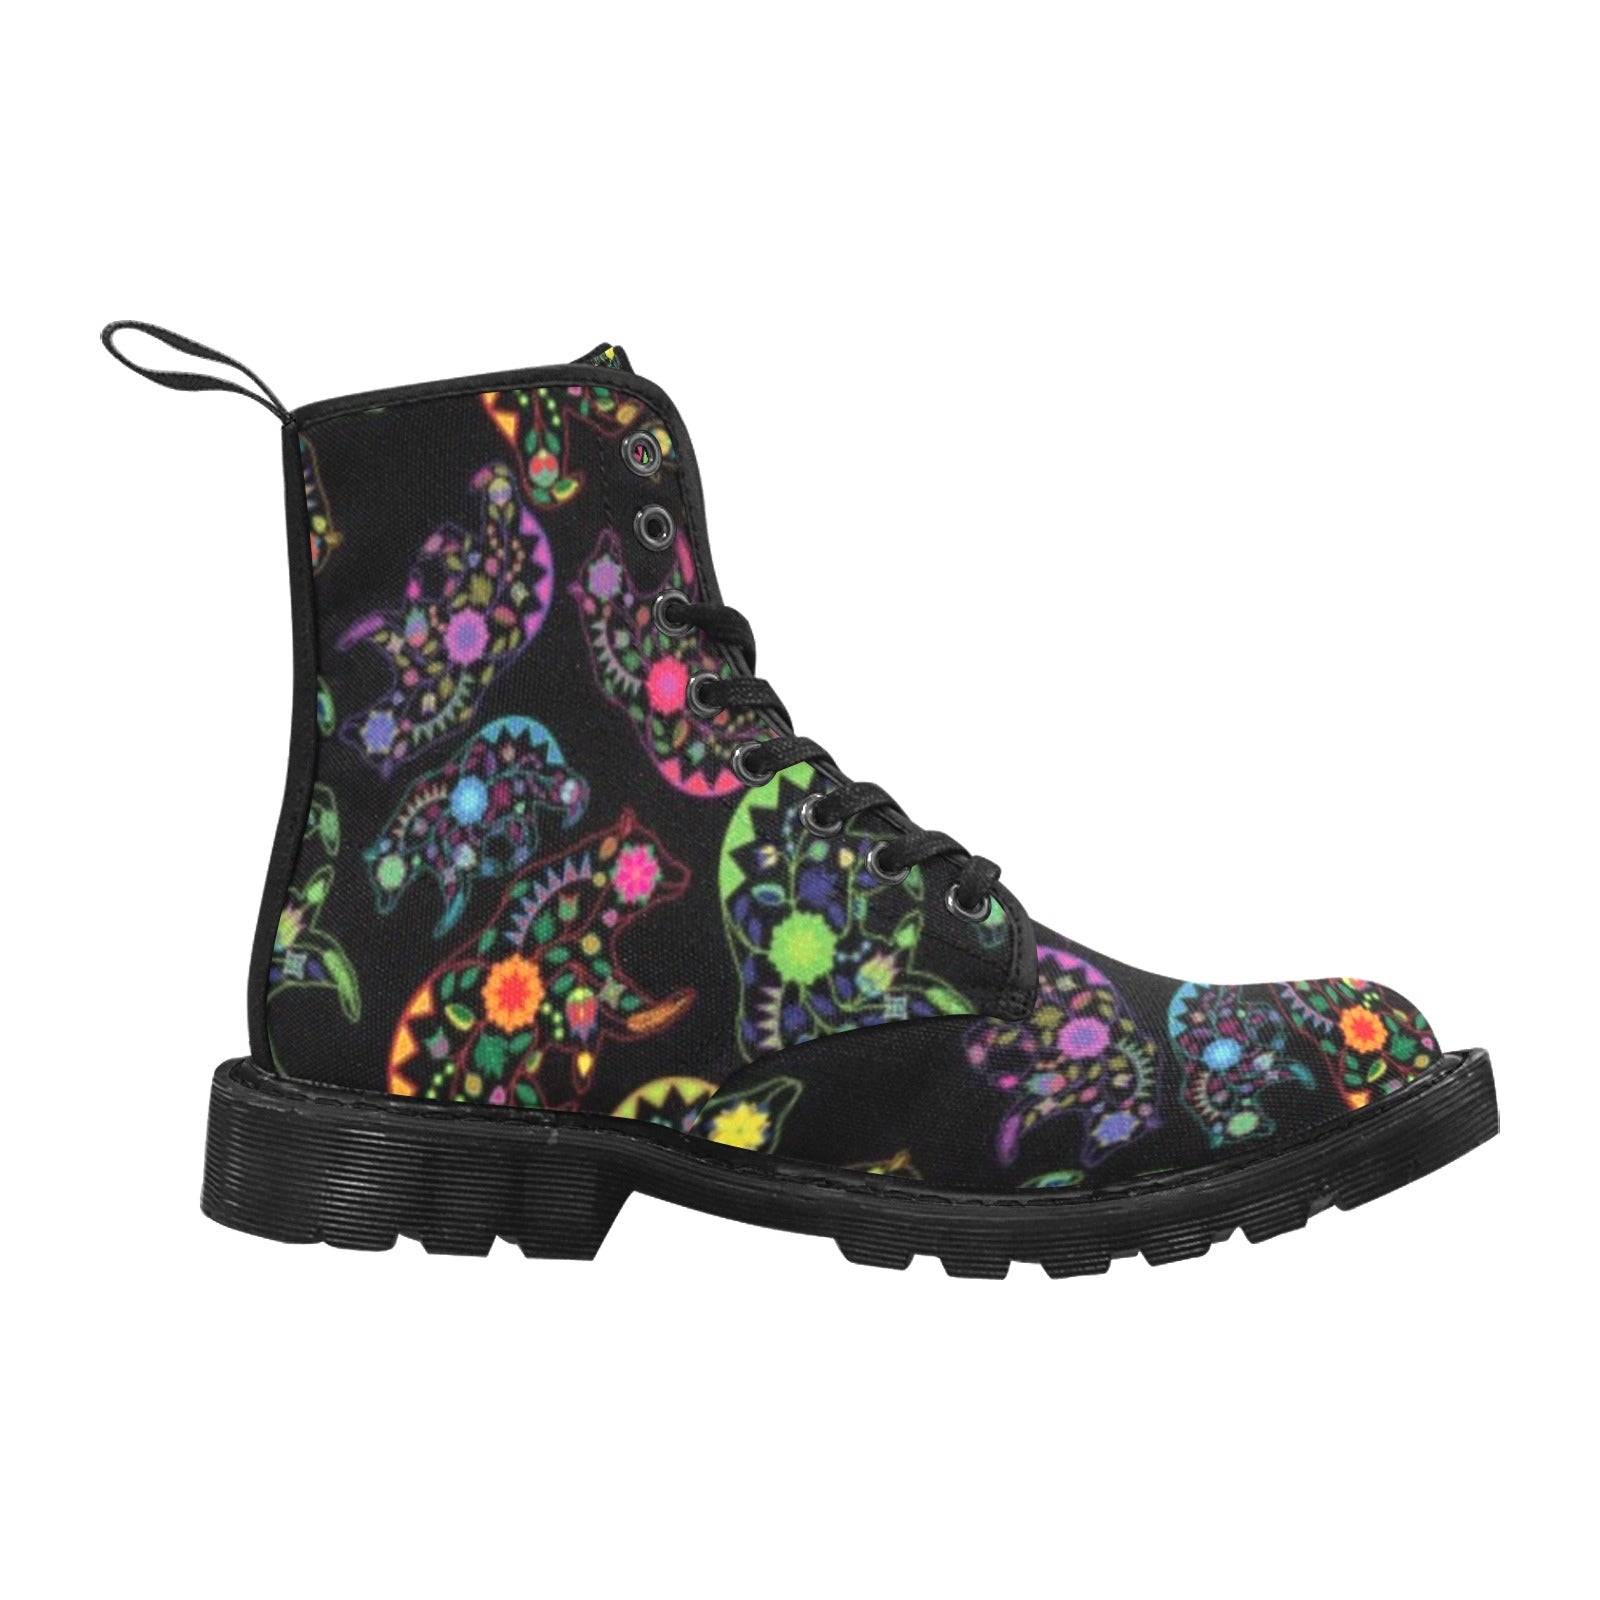 Neon Floral Bears Boots for Women (Black)